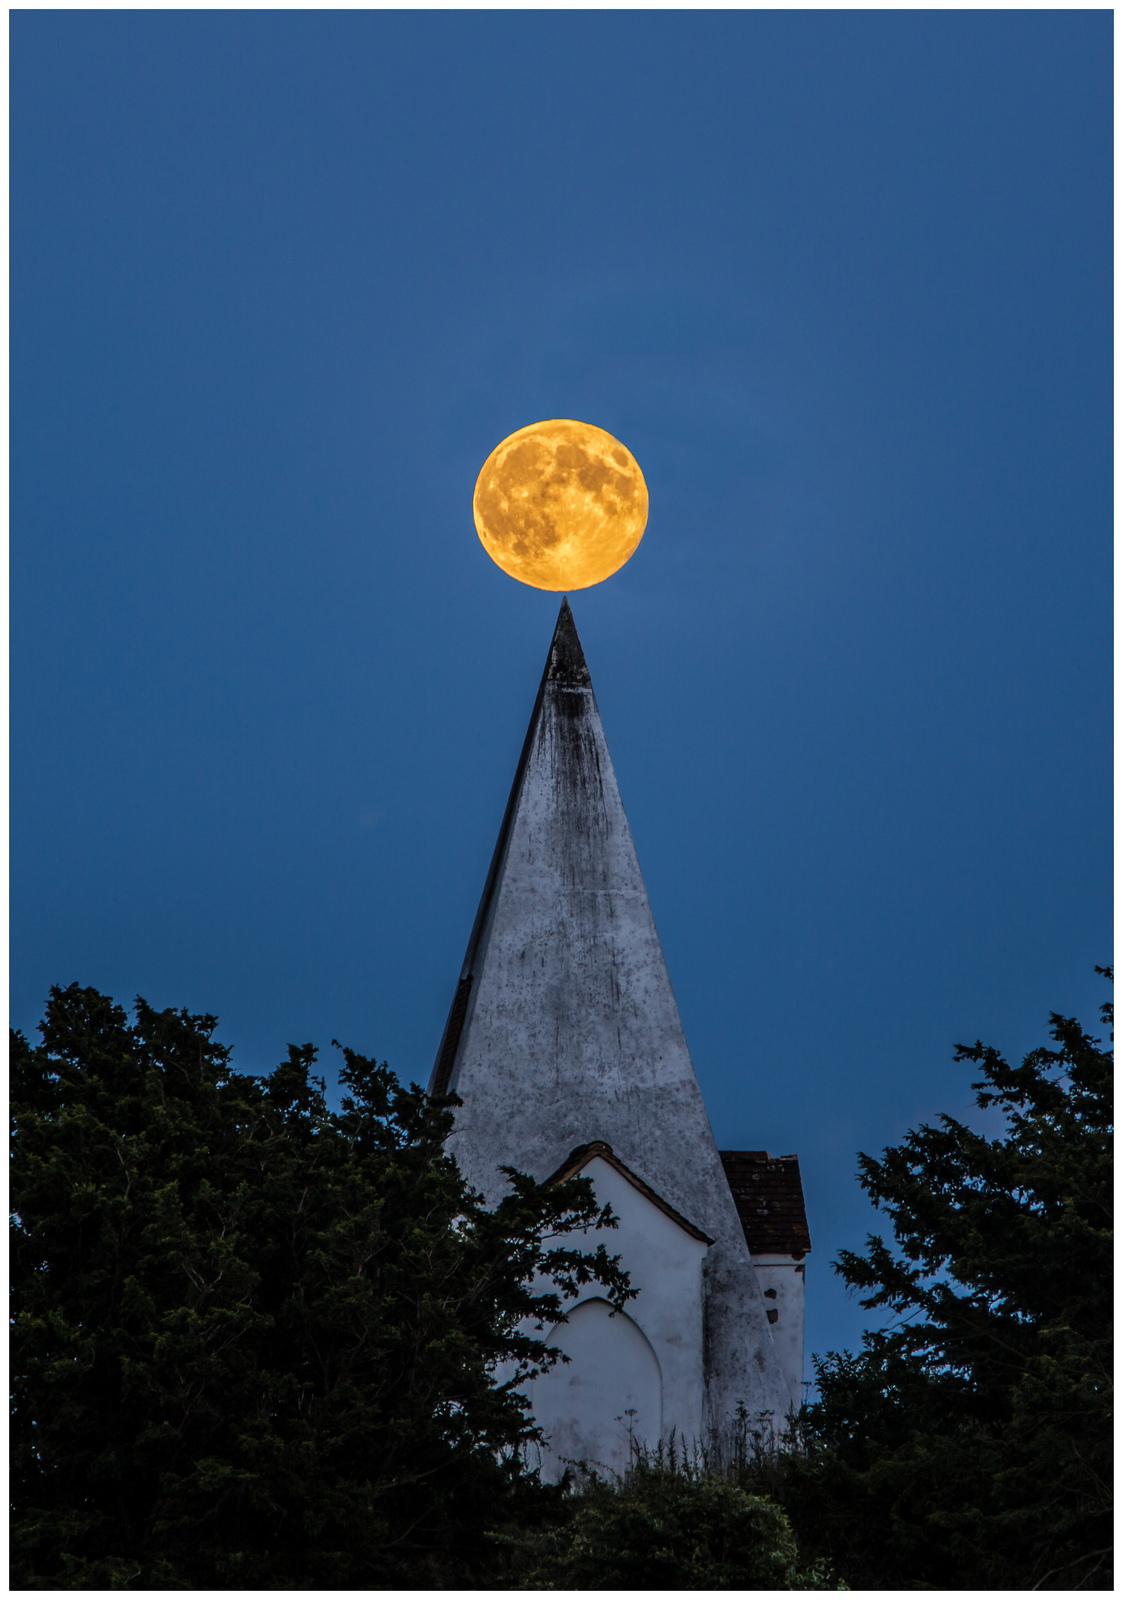 Here's a picture of the moon, last night at Farley Mount by Keety